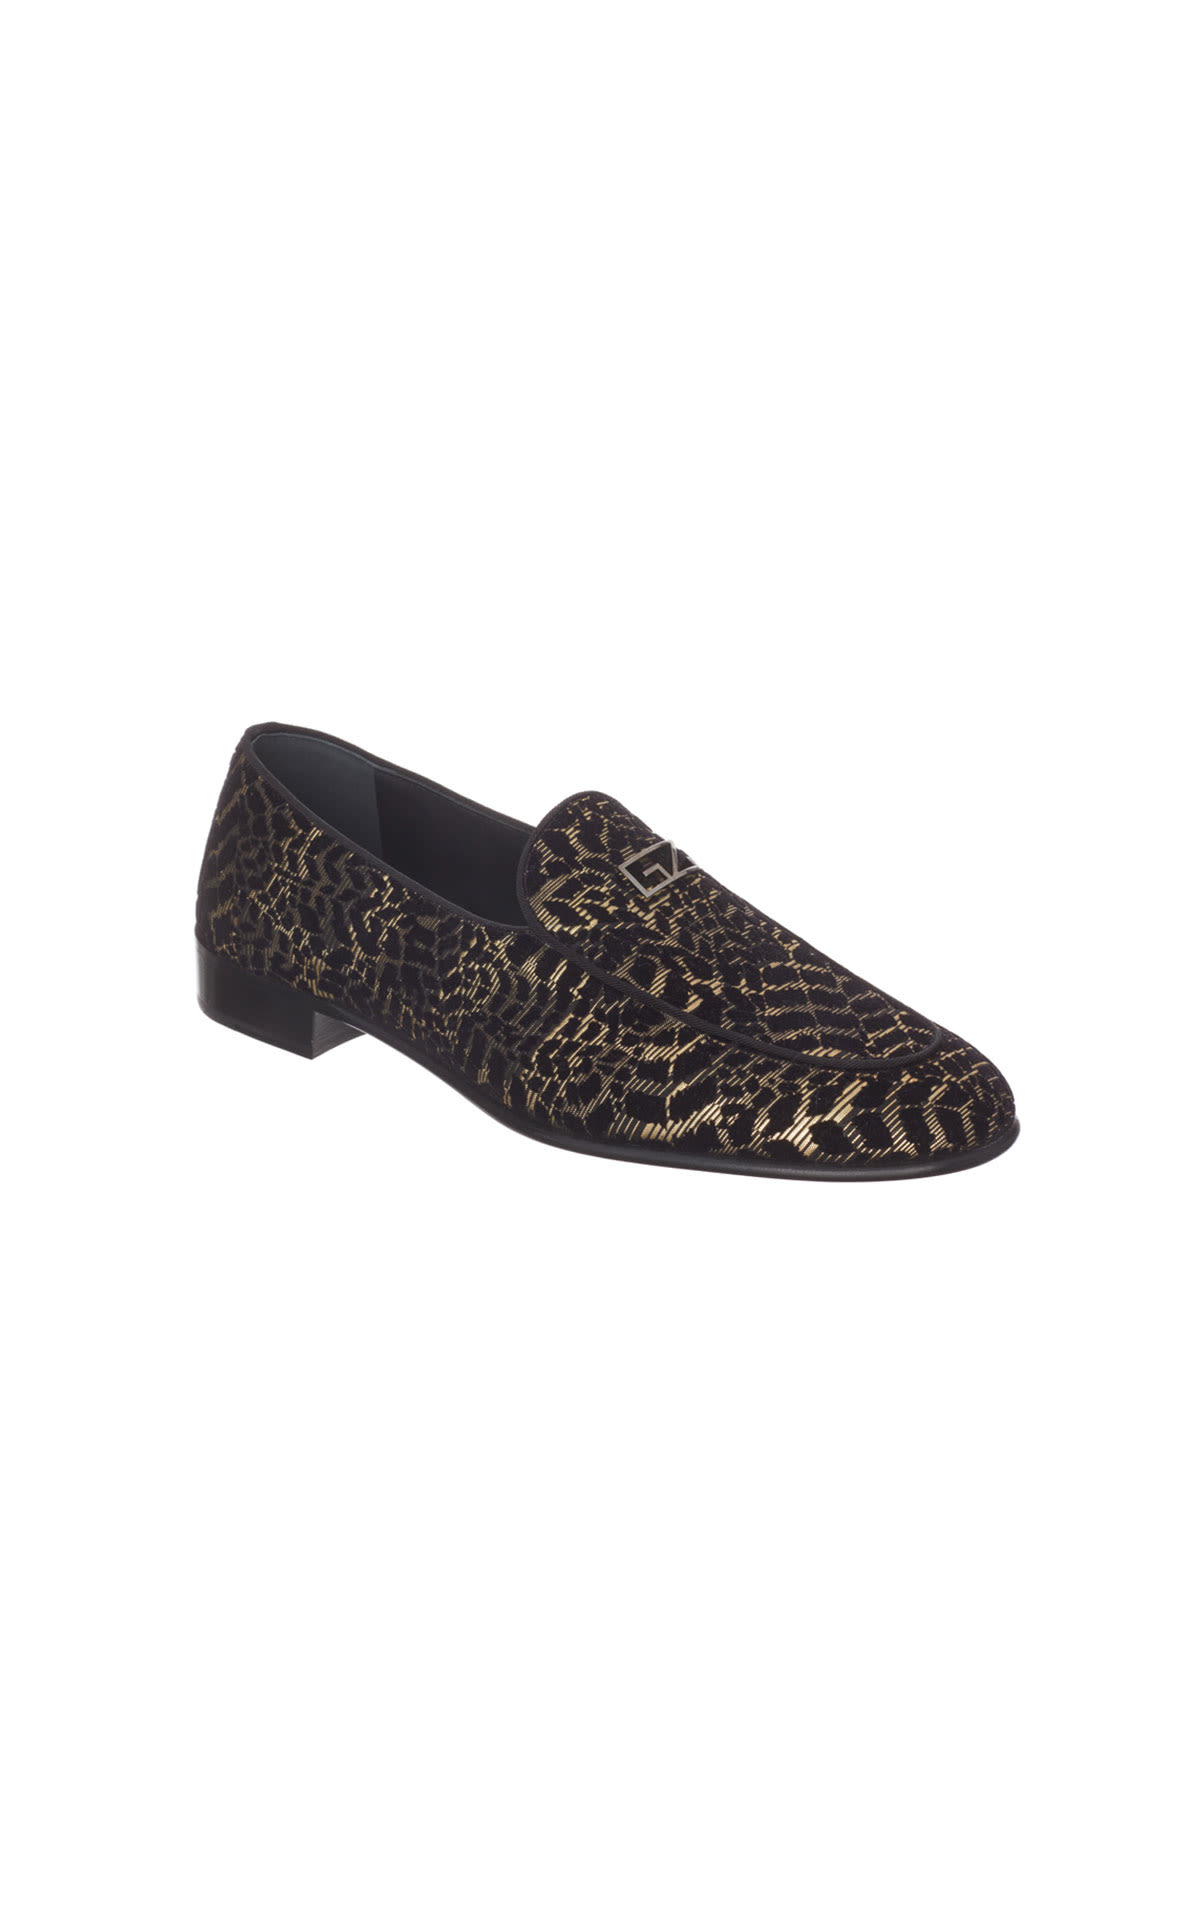 Giuseppe Zanotti Formal print shoes from Bicester Village